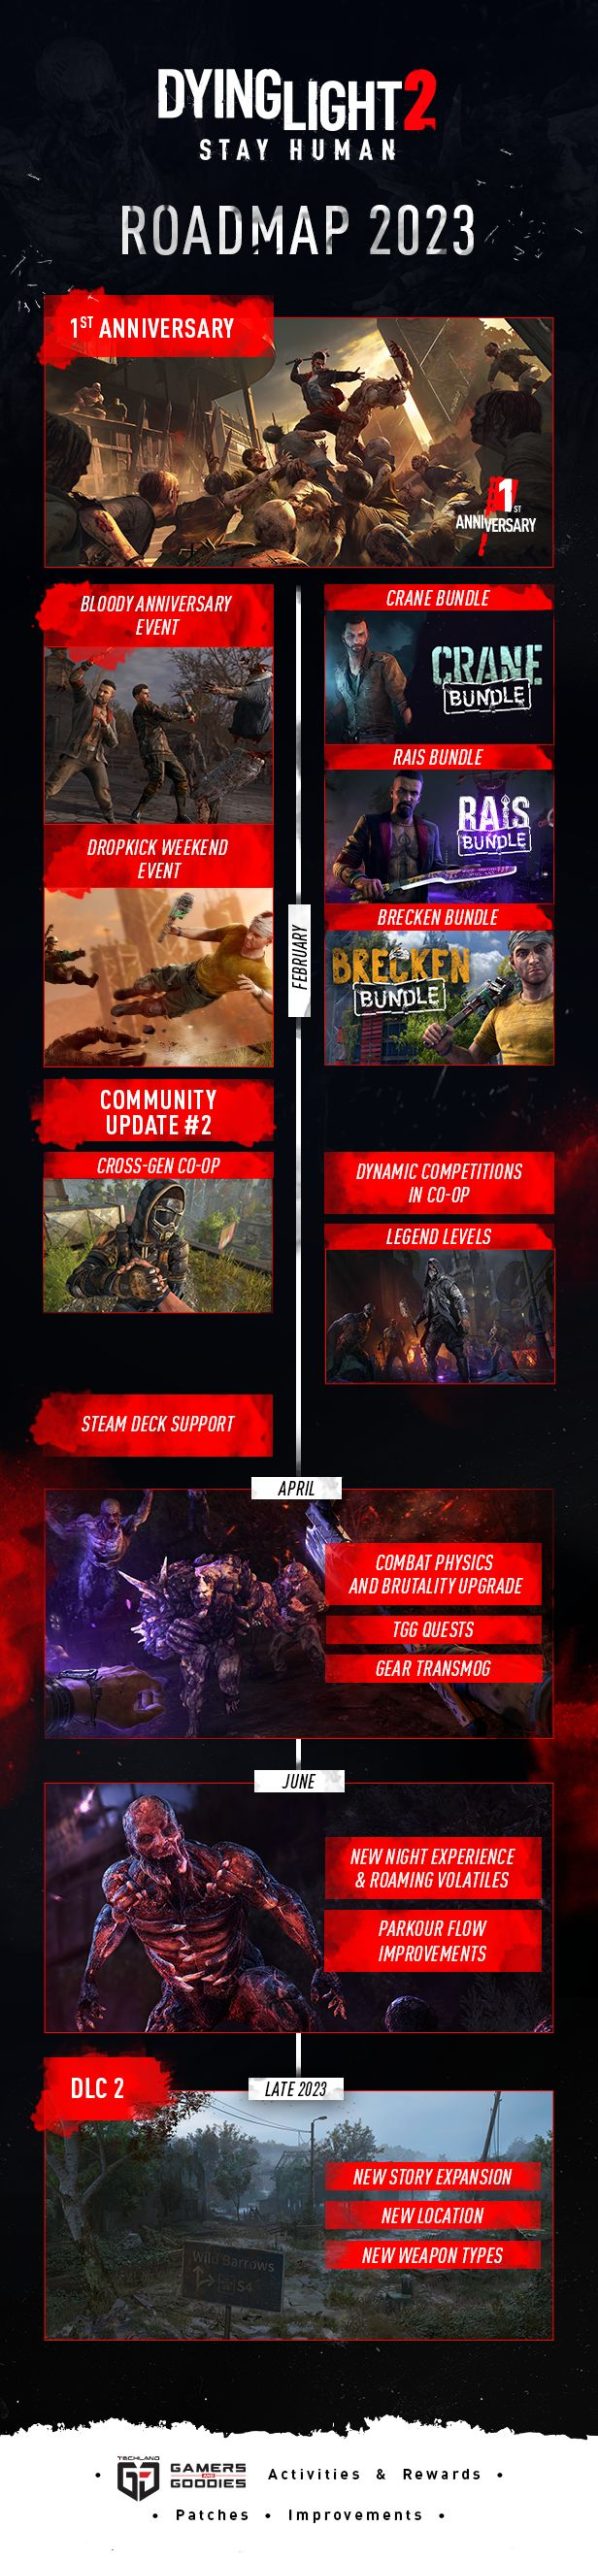 Dying Light 2 Roadmap 2023 scaled